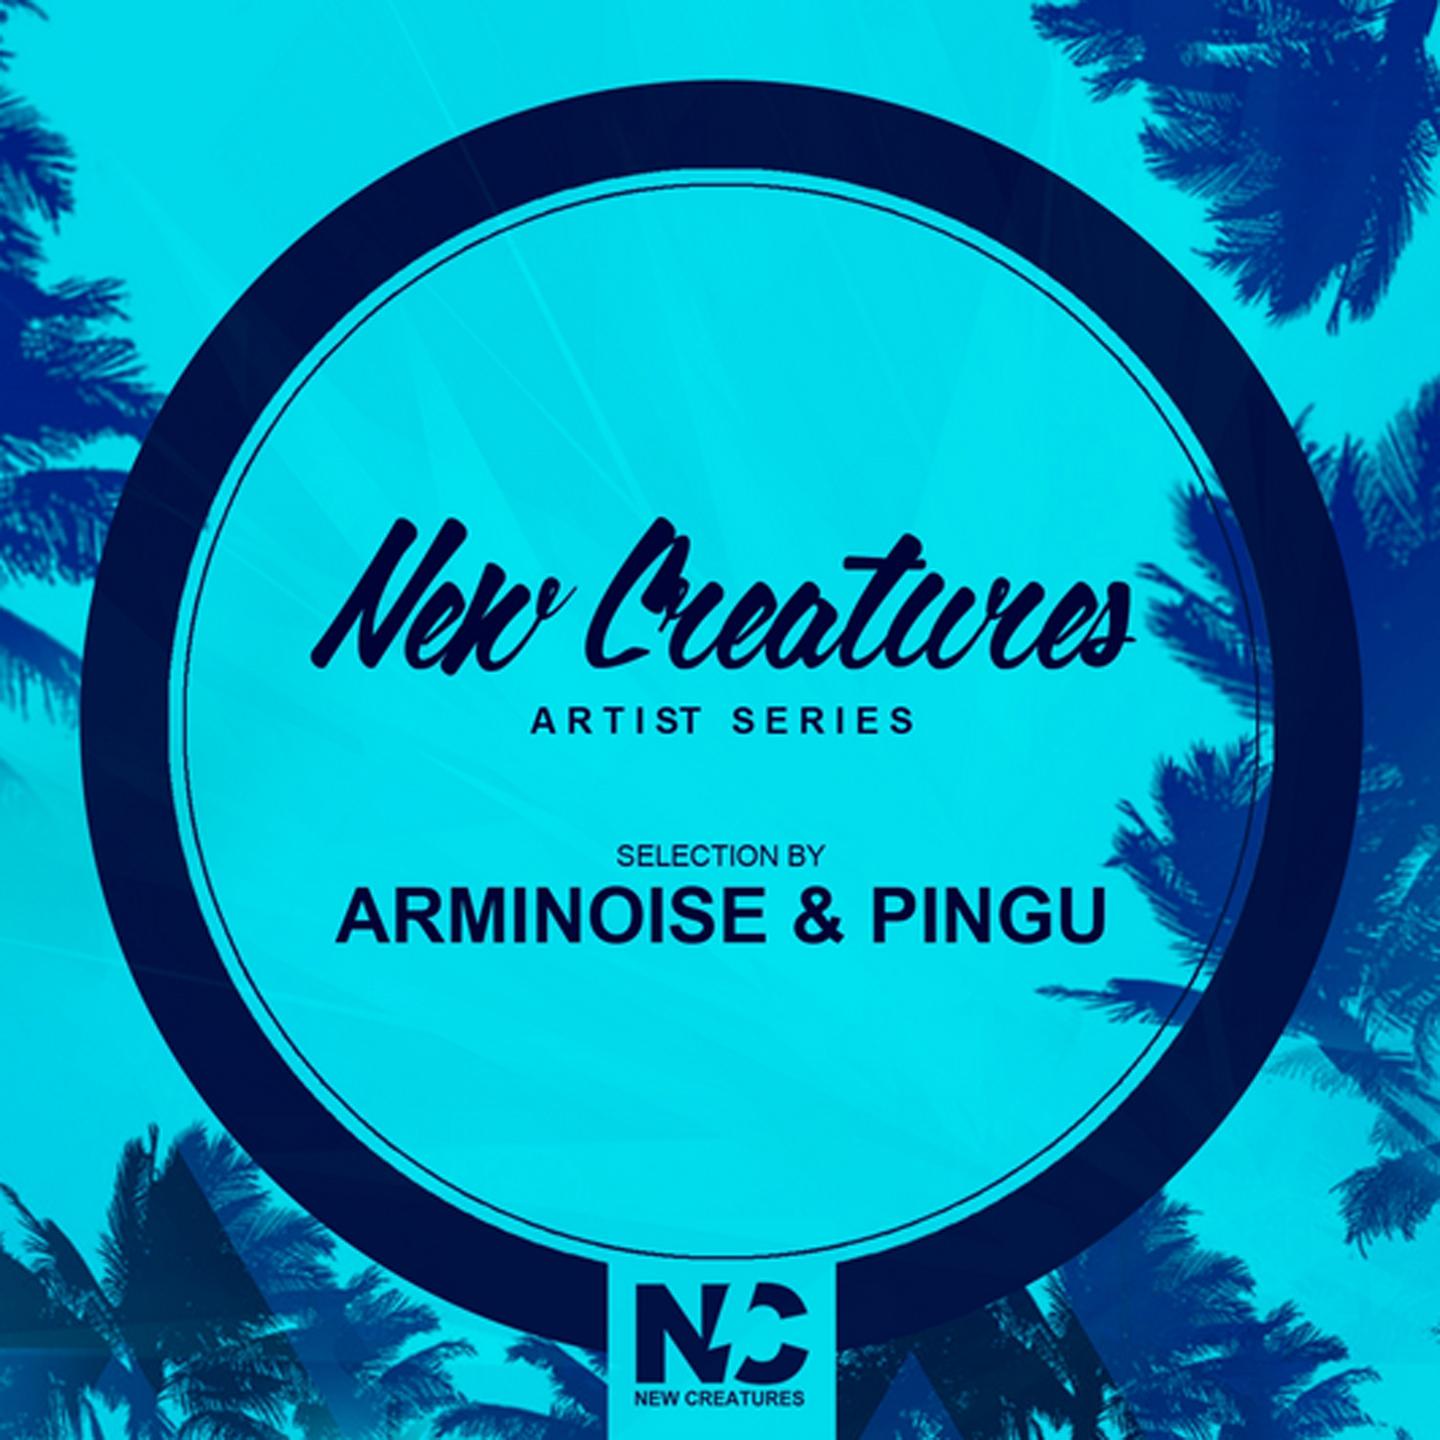 New Creatures Artist Series (Selection by Arminoise & Pingu)